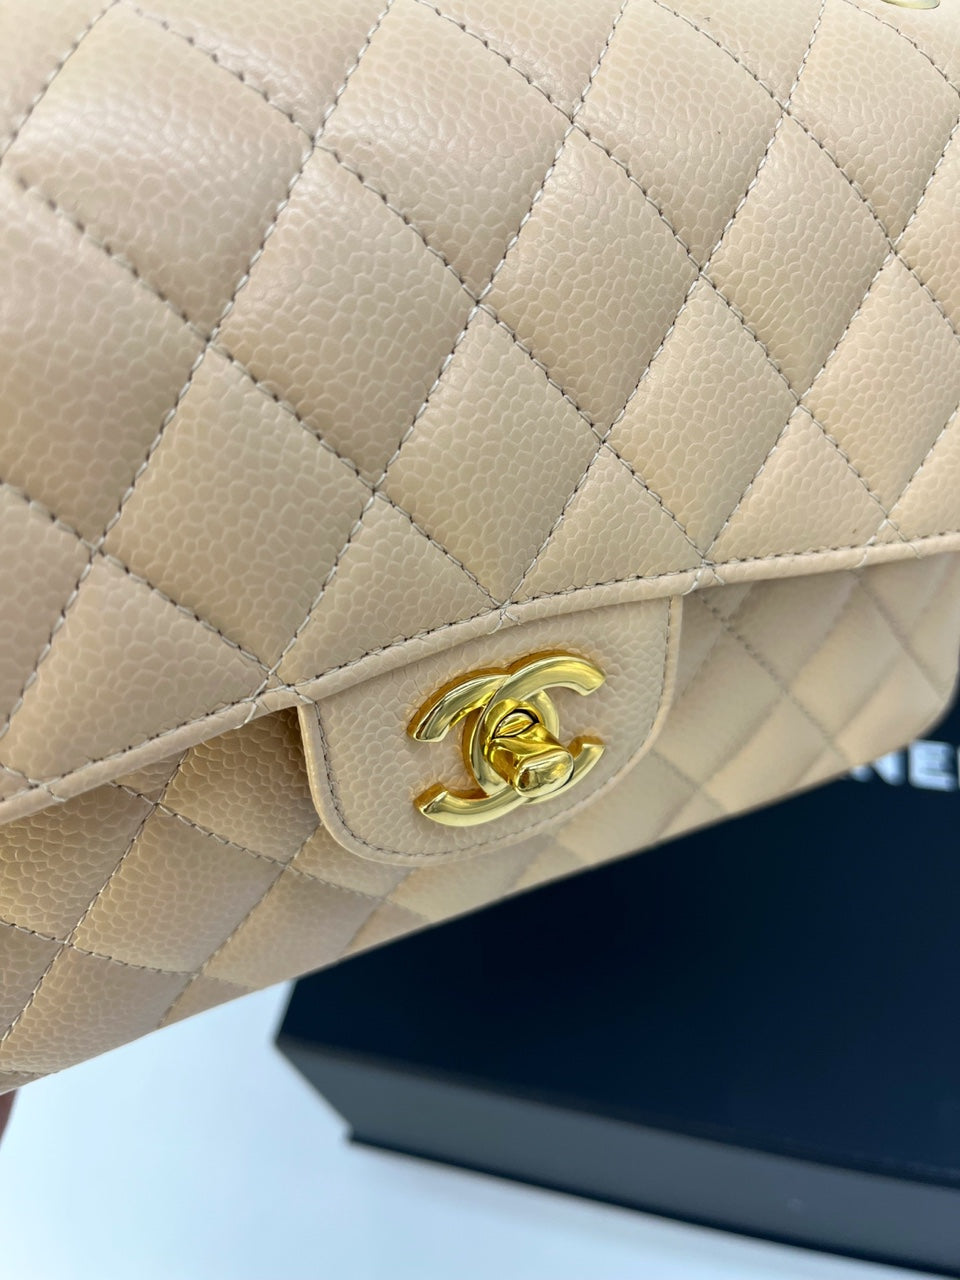 Chanel Beige Quilted Caviar Small Classic Double Flap Gold Hardware (Like New), Womens Handbag